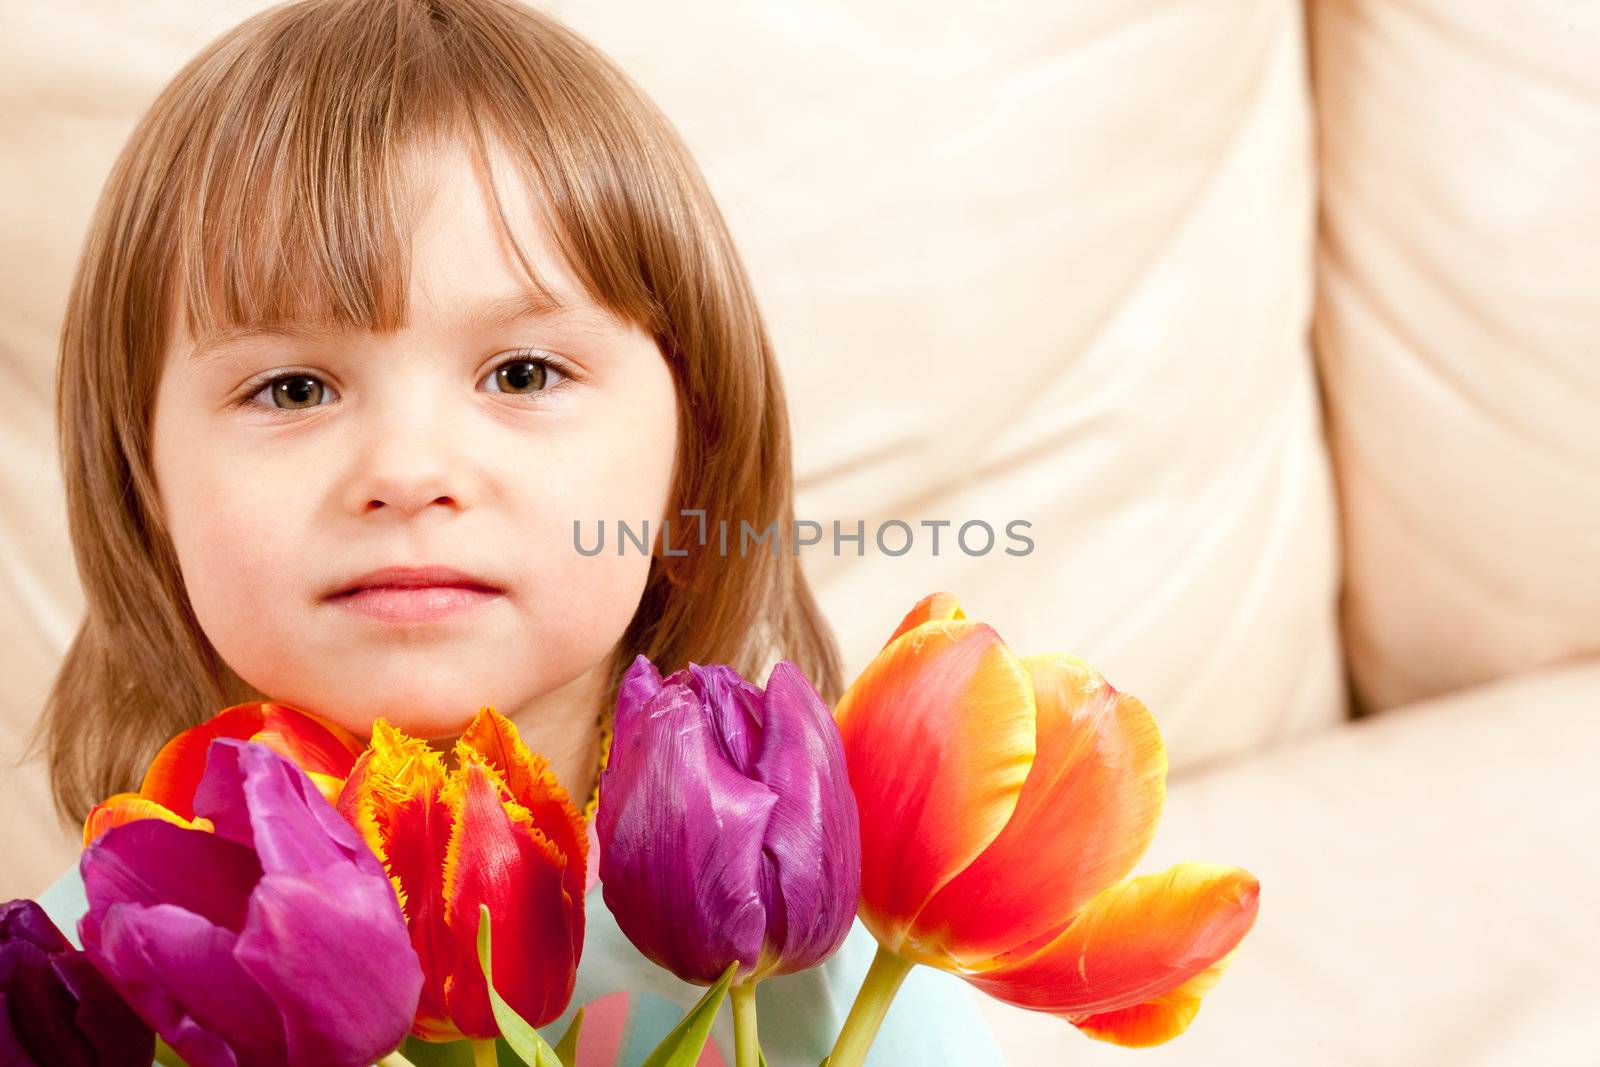 people series: little girl with tulips smile